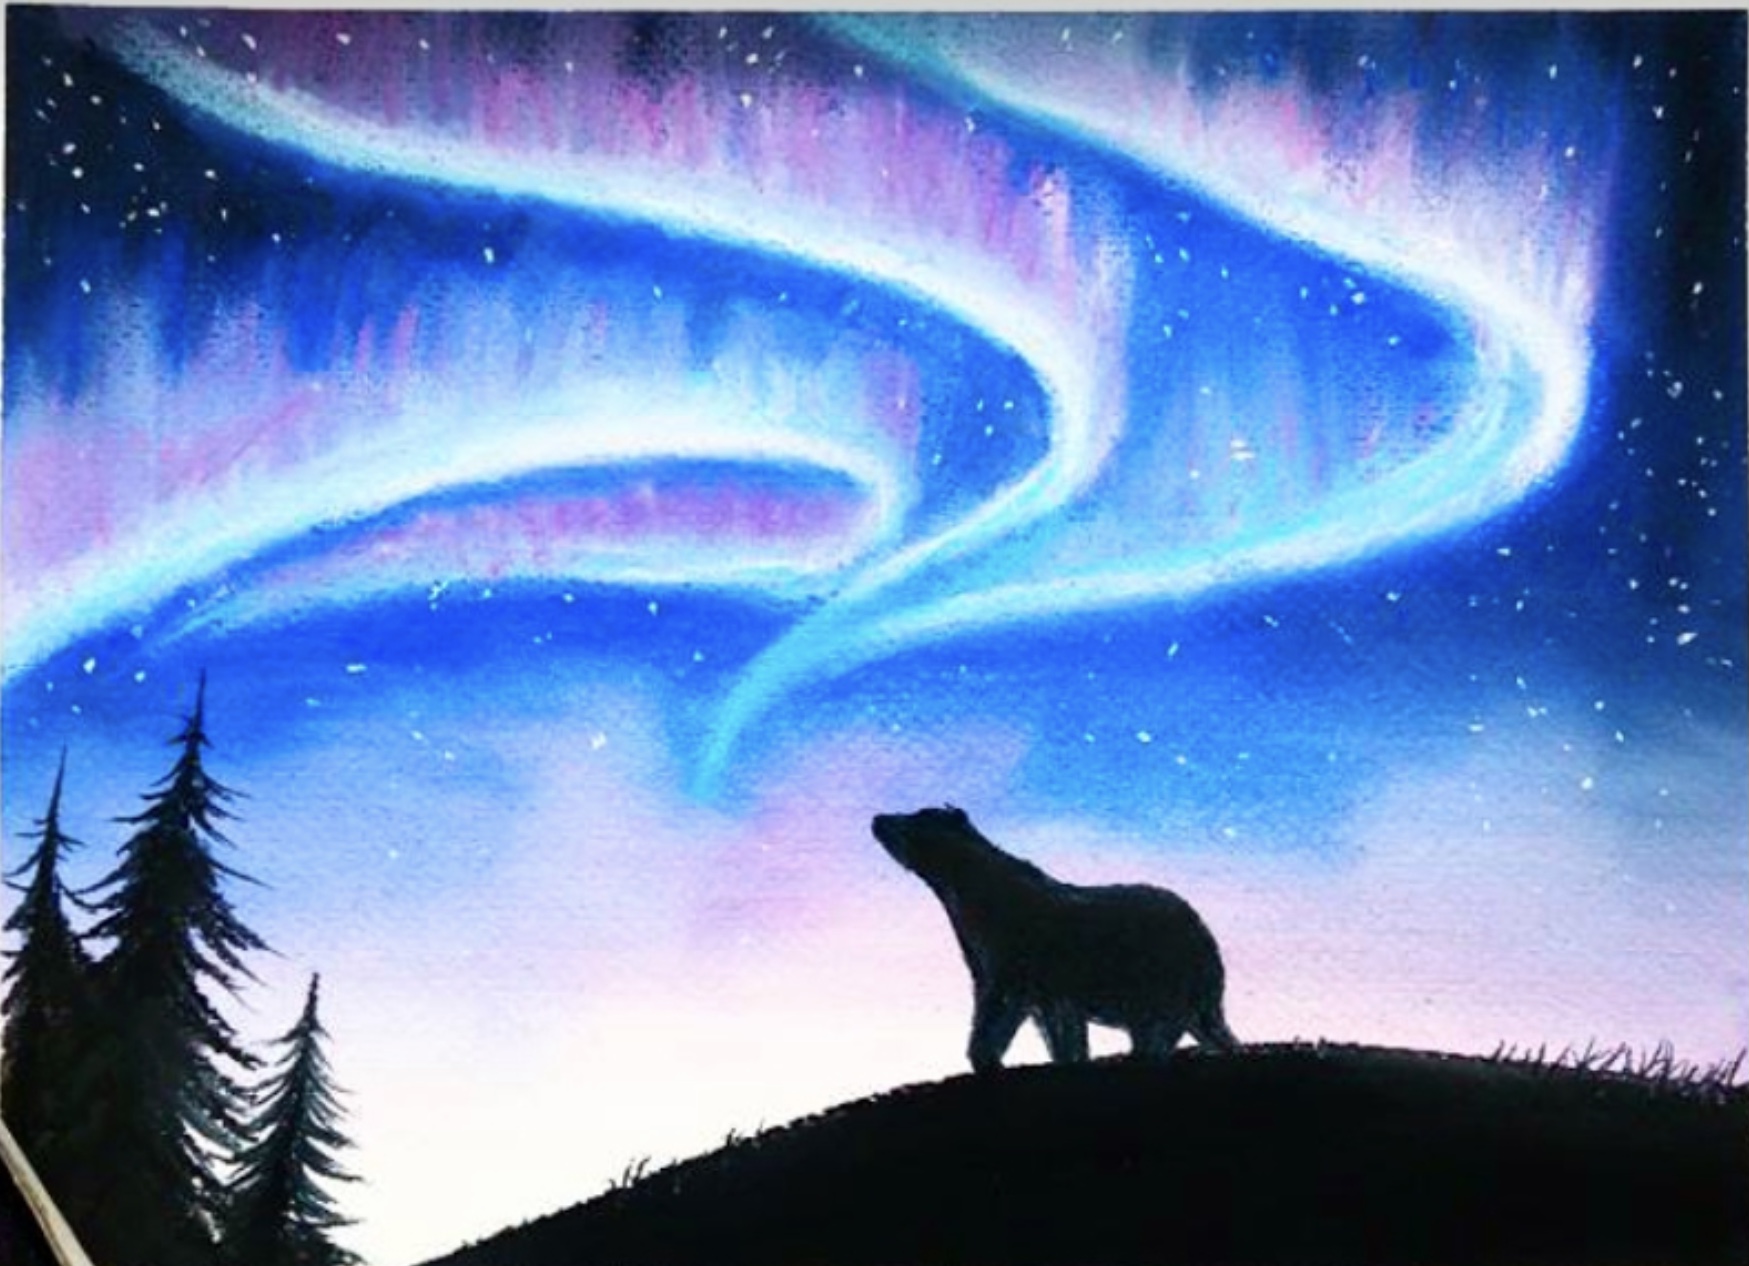 picture of artwork; northern lights swirl bright blue in deep indigo sky while silhouettes of a polar bear and cluster of evergreen trees hold the foreground